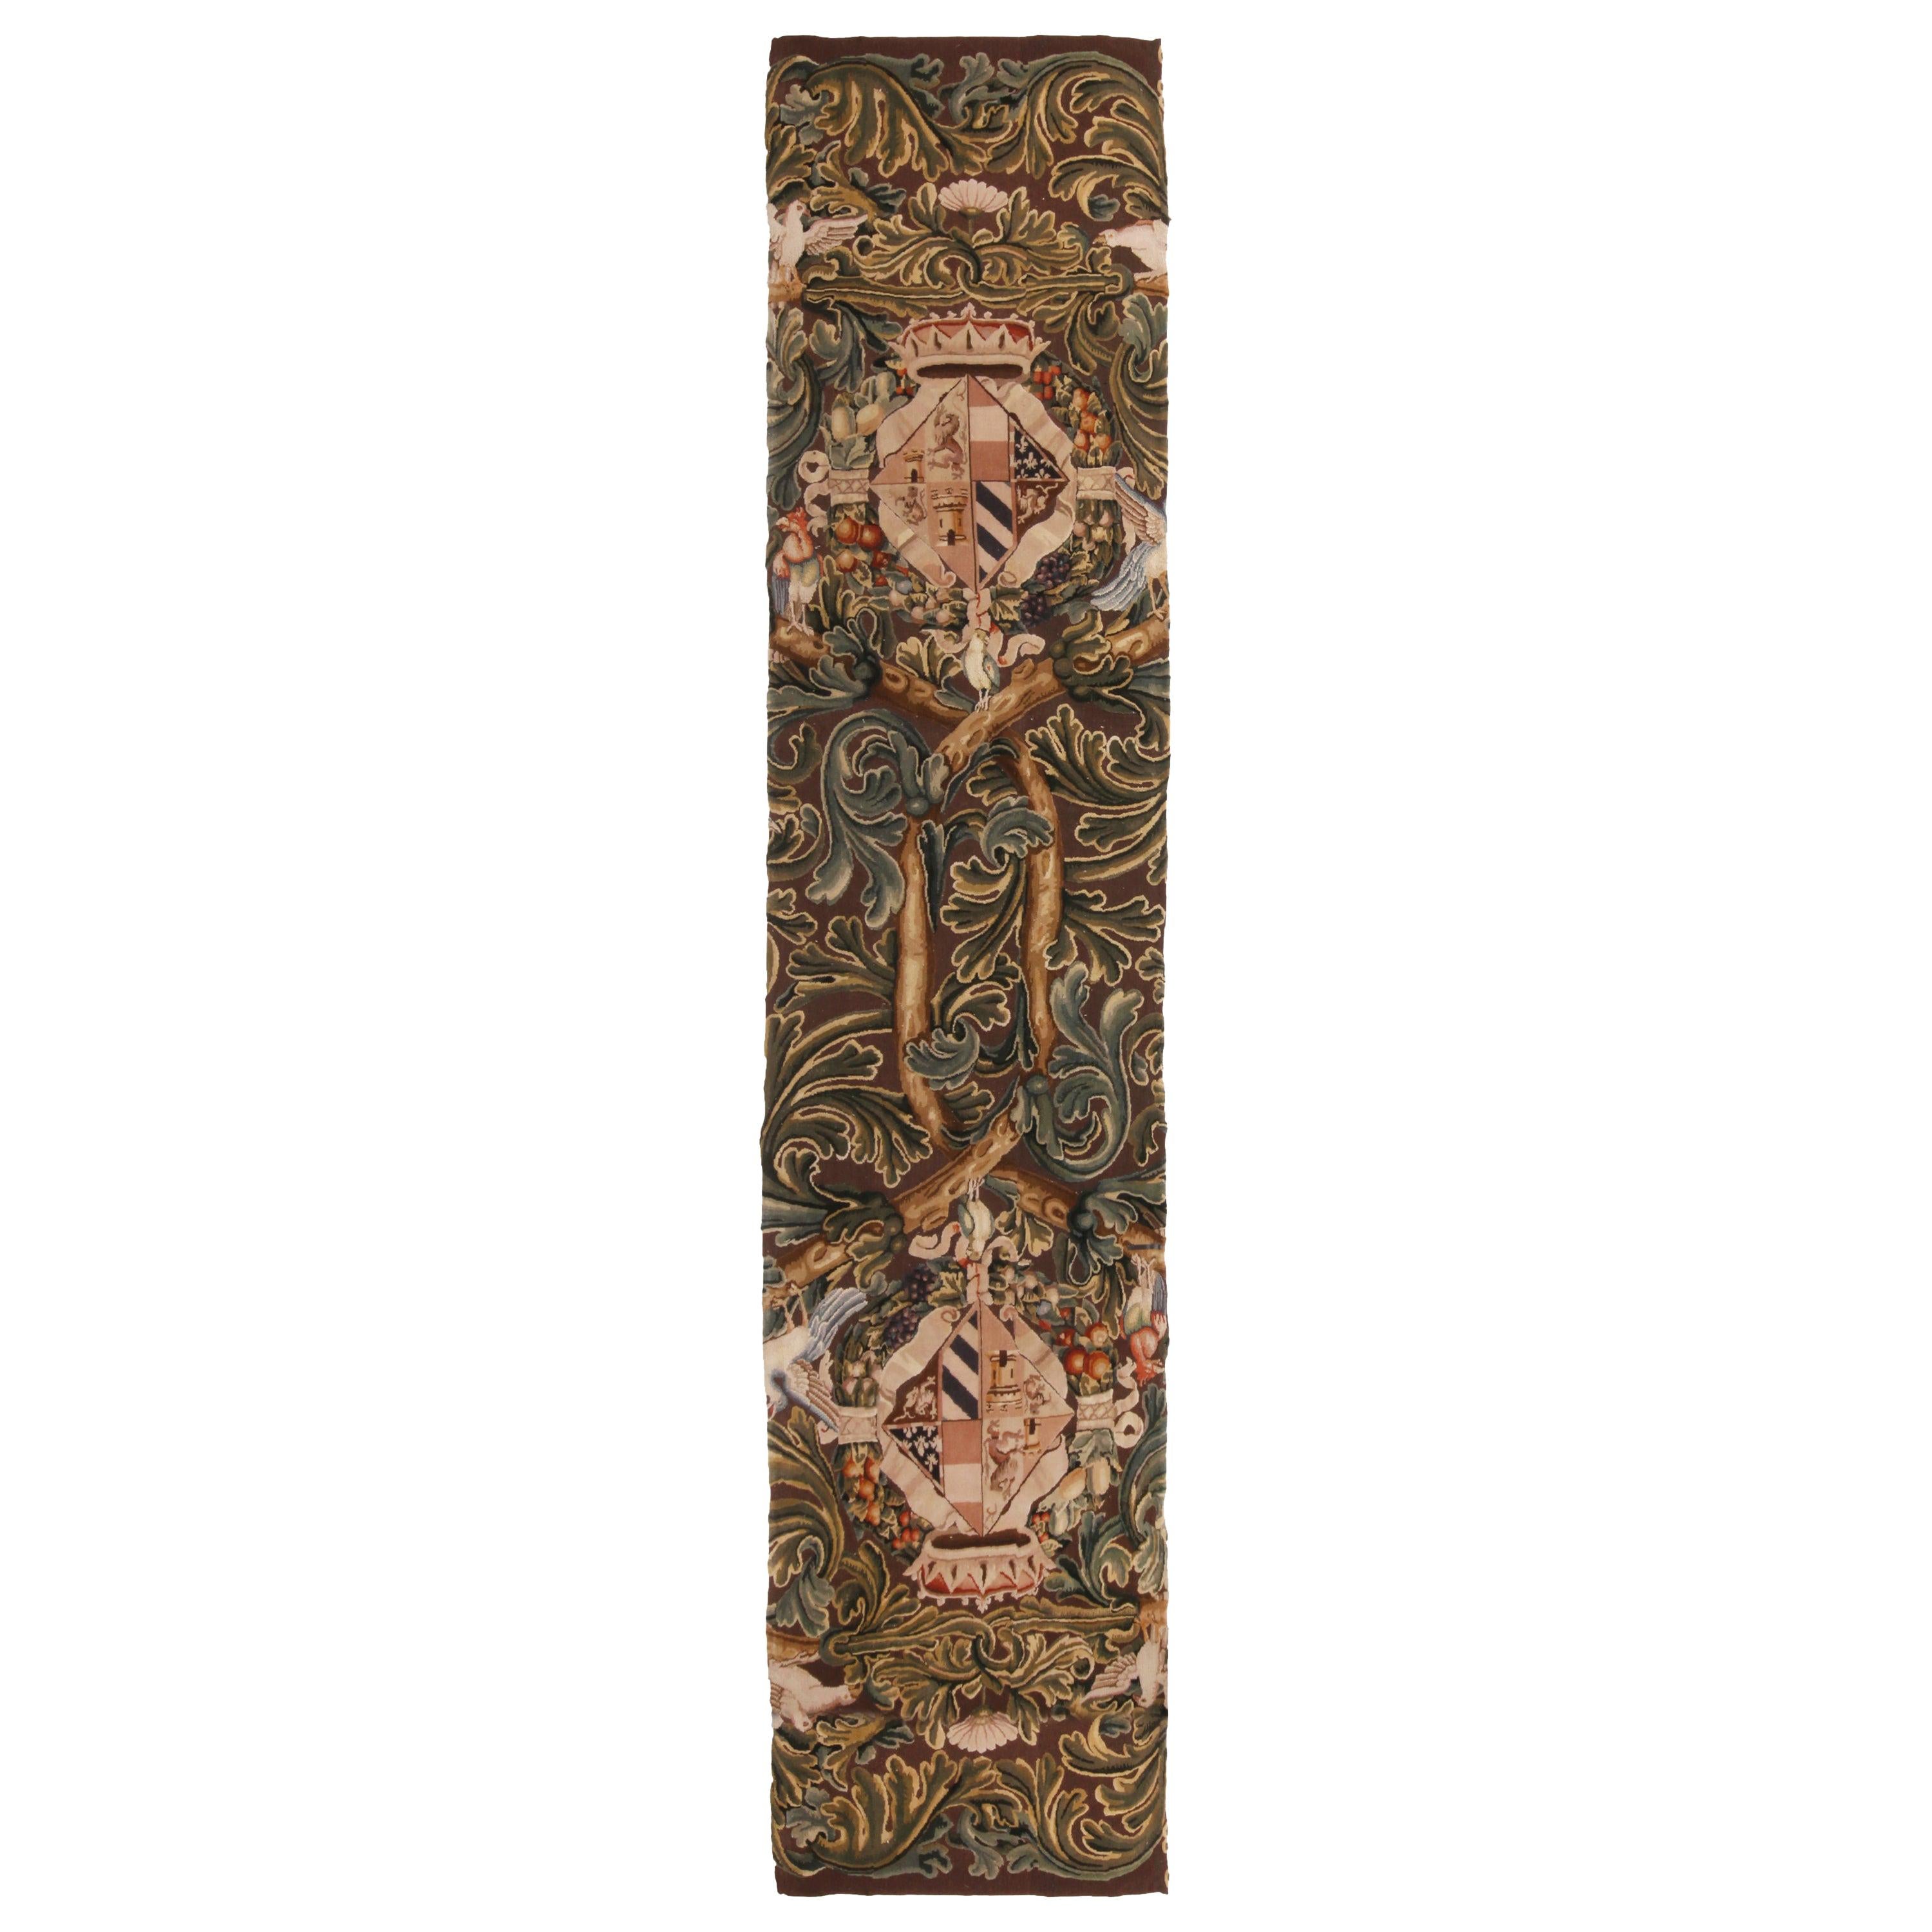 Rug & Kilim's Tudor Crest Inspired Cream and Brown Floral Wool Runner